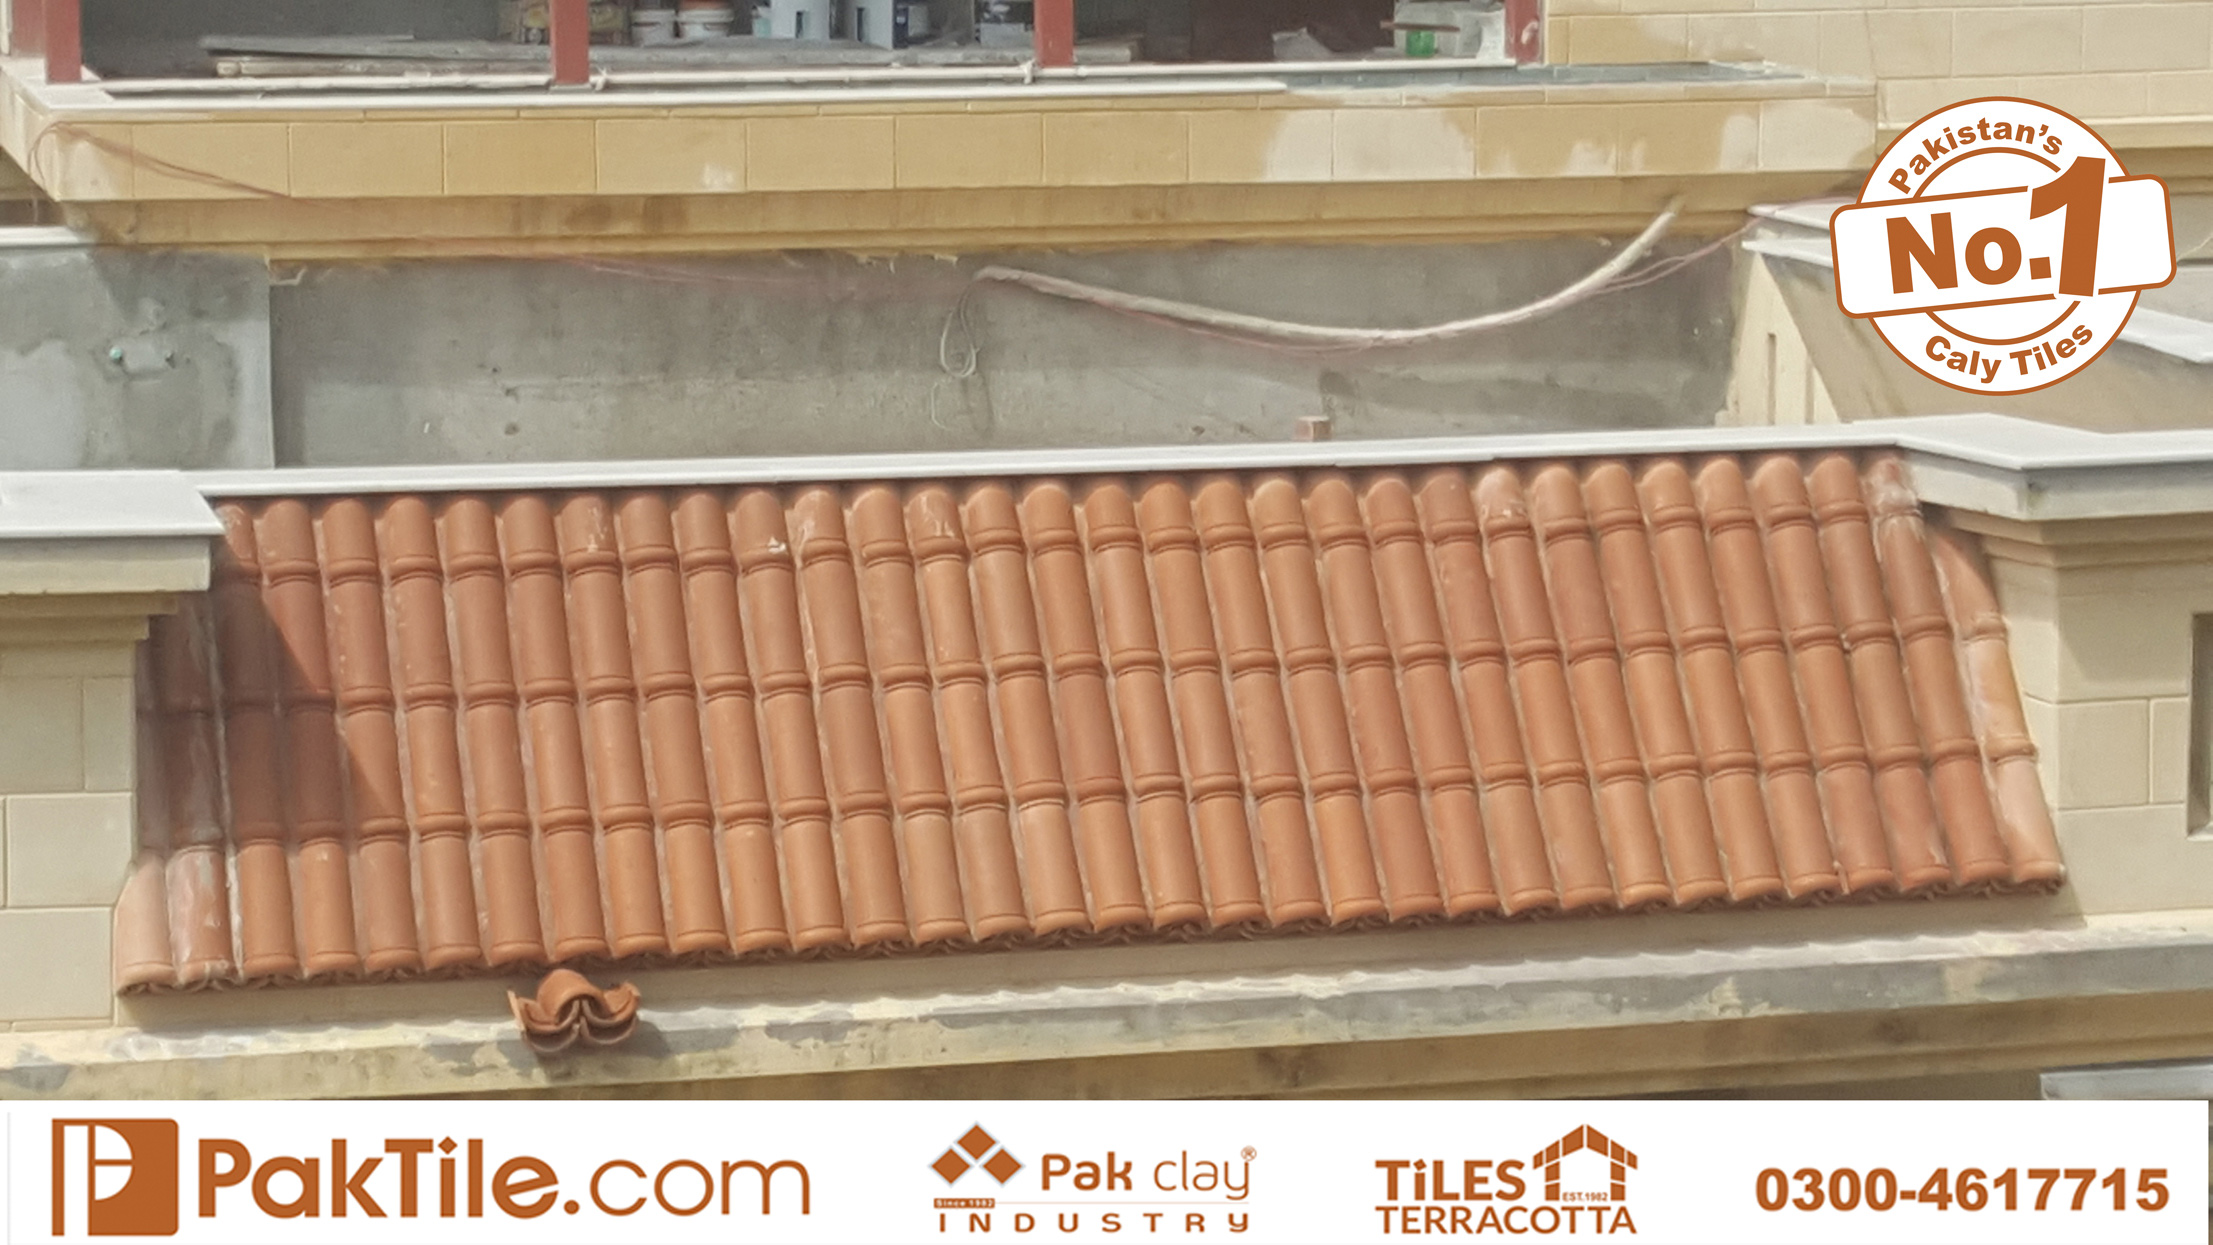 2 Khaprail Tiles in Karachi Pakistan How to Tell the Difference Between Clay and Concrete Toof Tiles Images